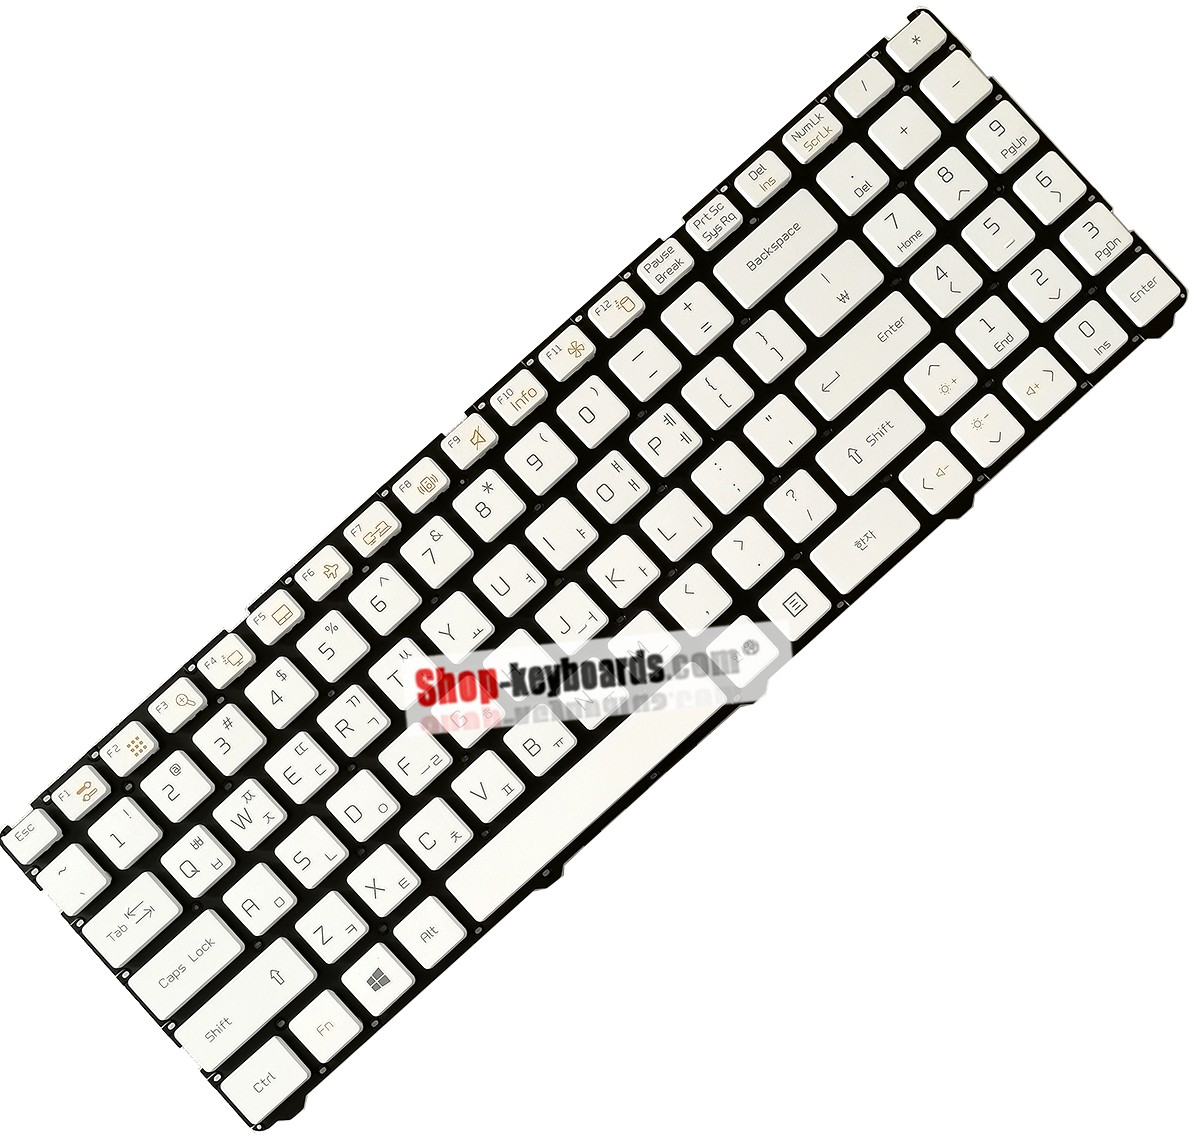 LG MP-12K73FO-9207 Keyboard replacement